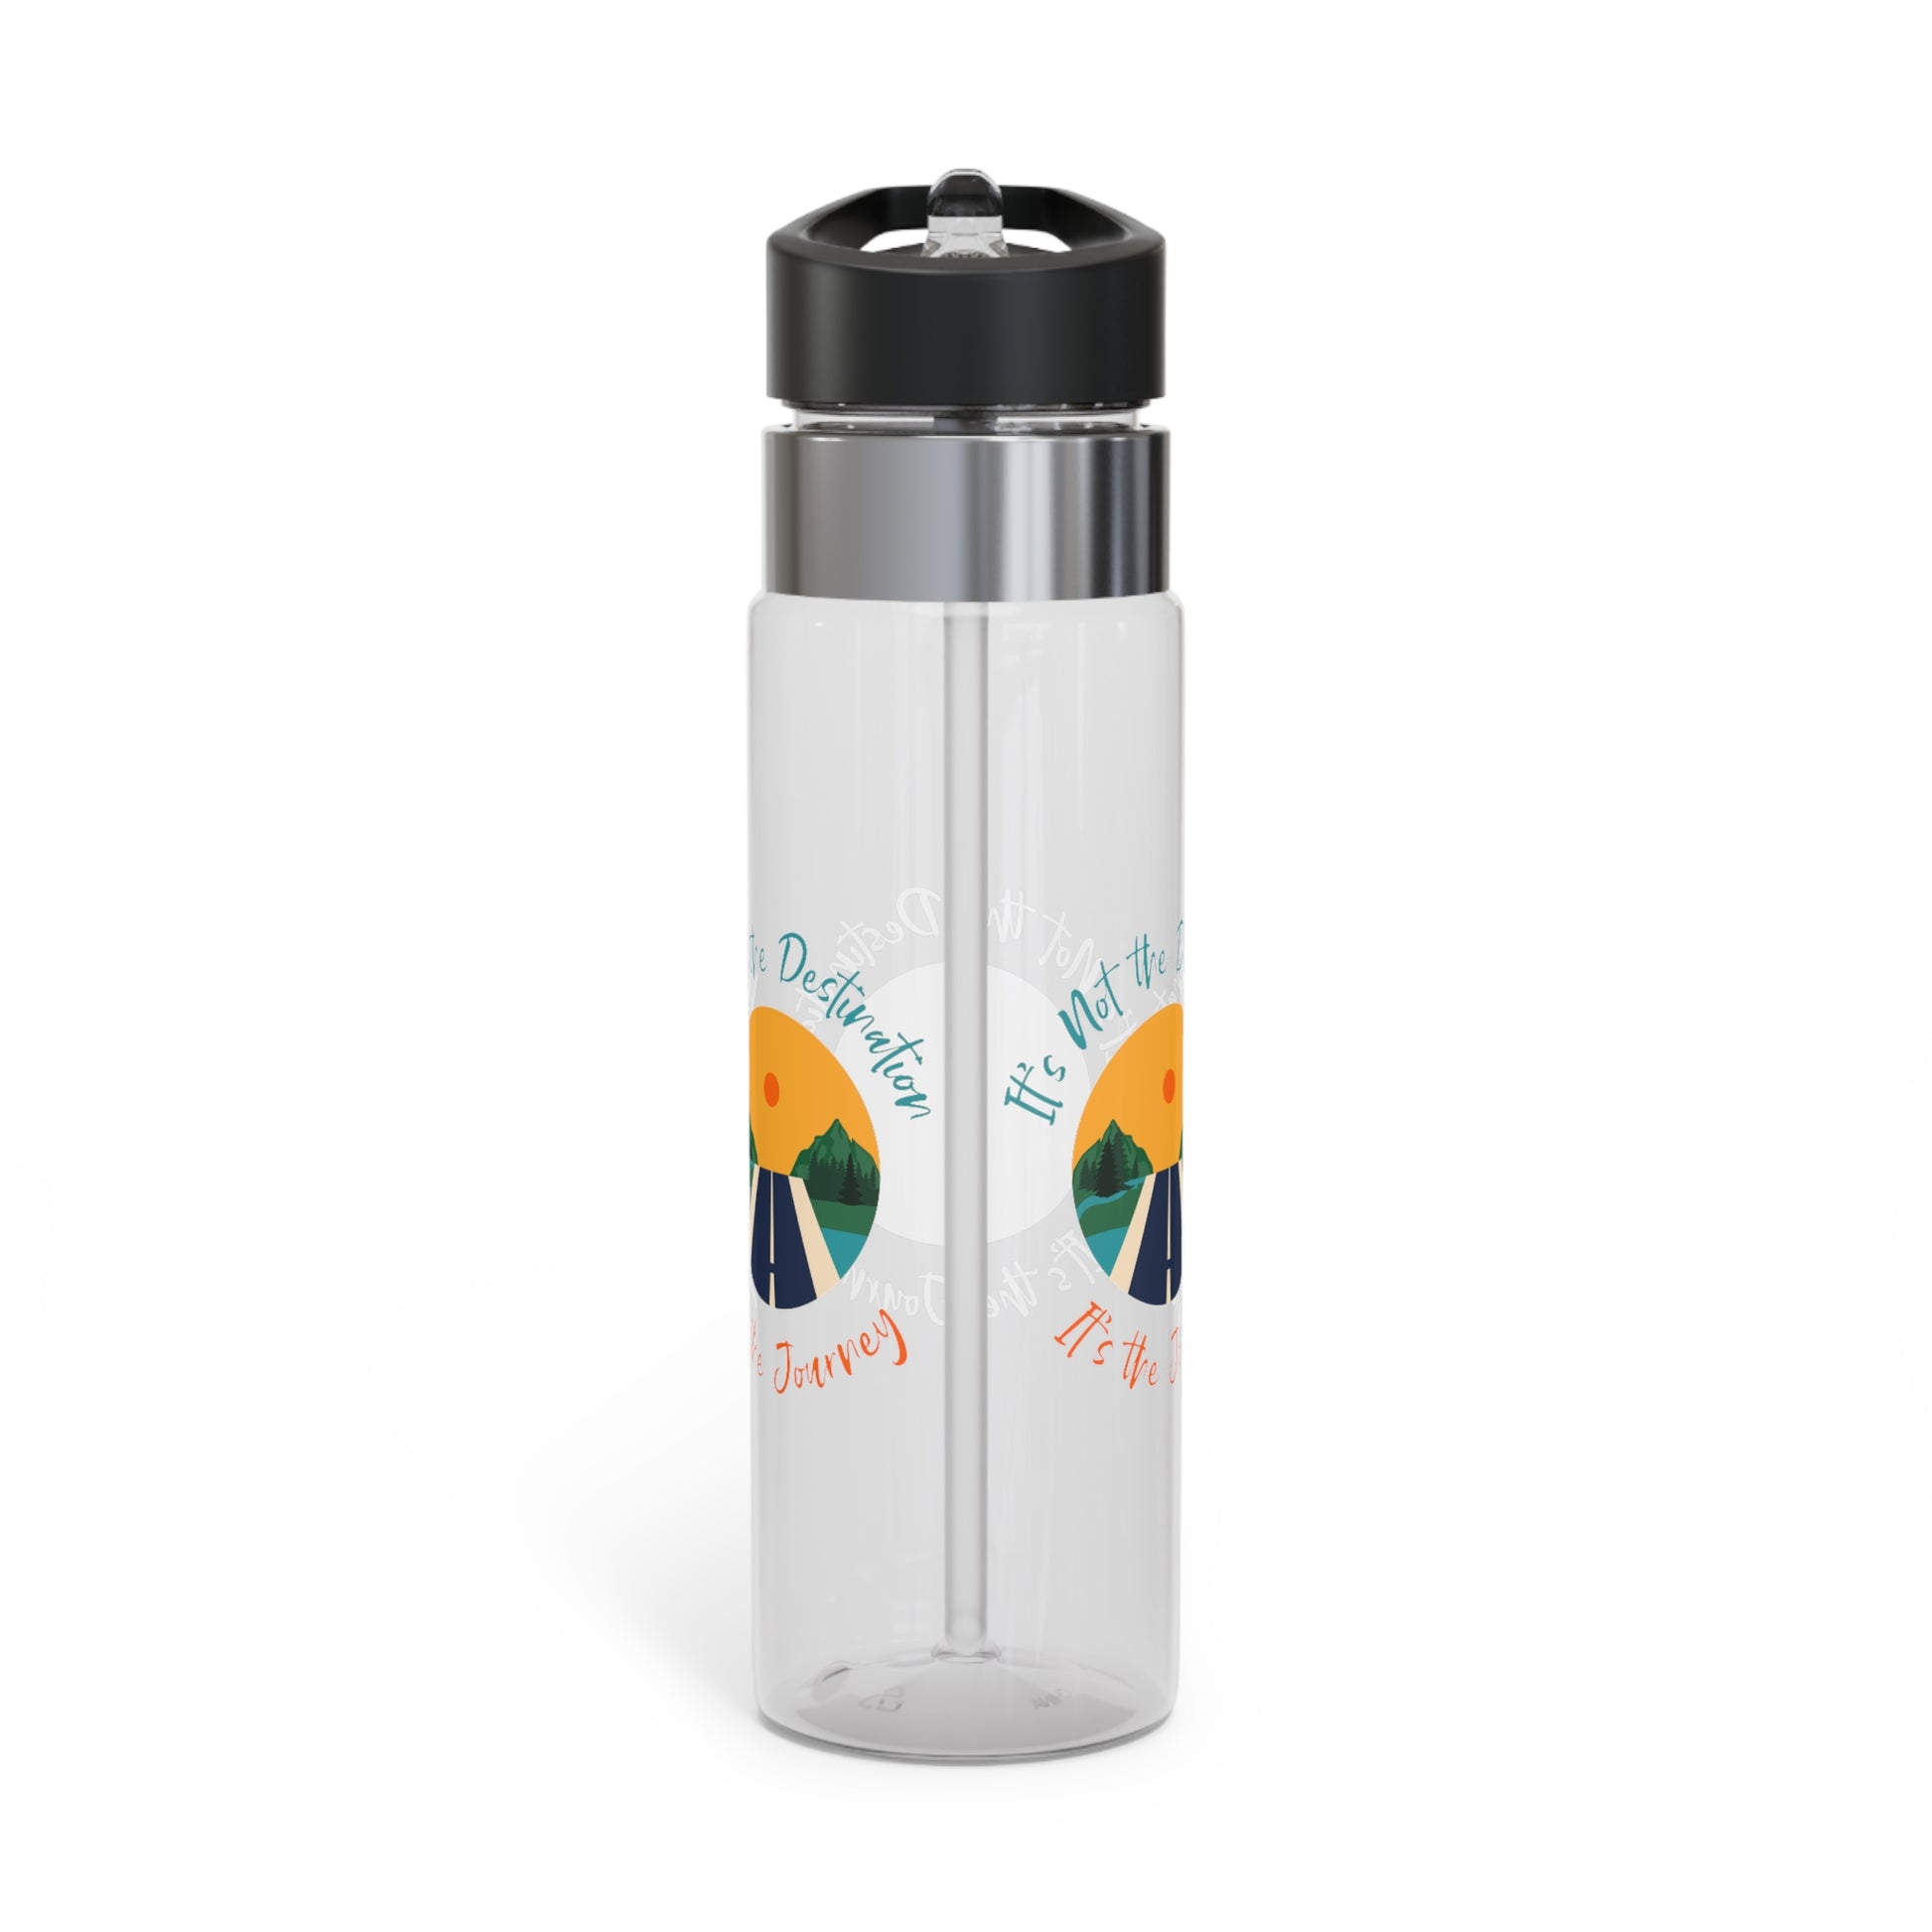 Clear Kensington Tritan™ BPA-free water bottle with black lid and printed inspirational text "it's the hydration for me" alongside two orange fruit graphics.